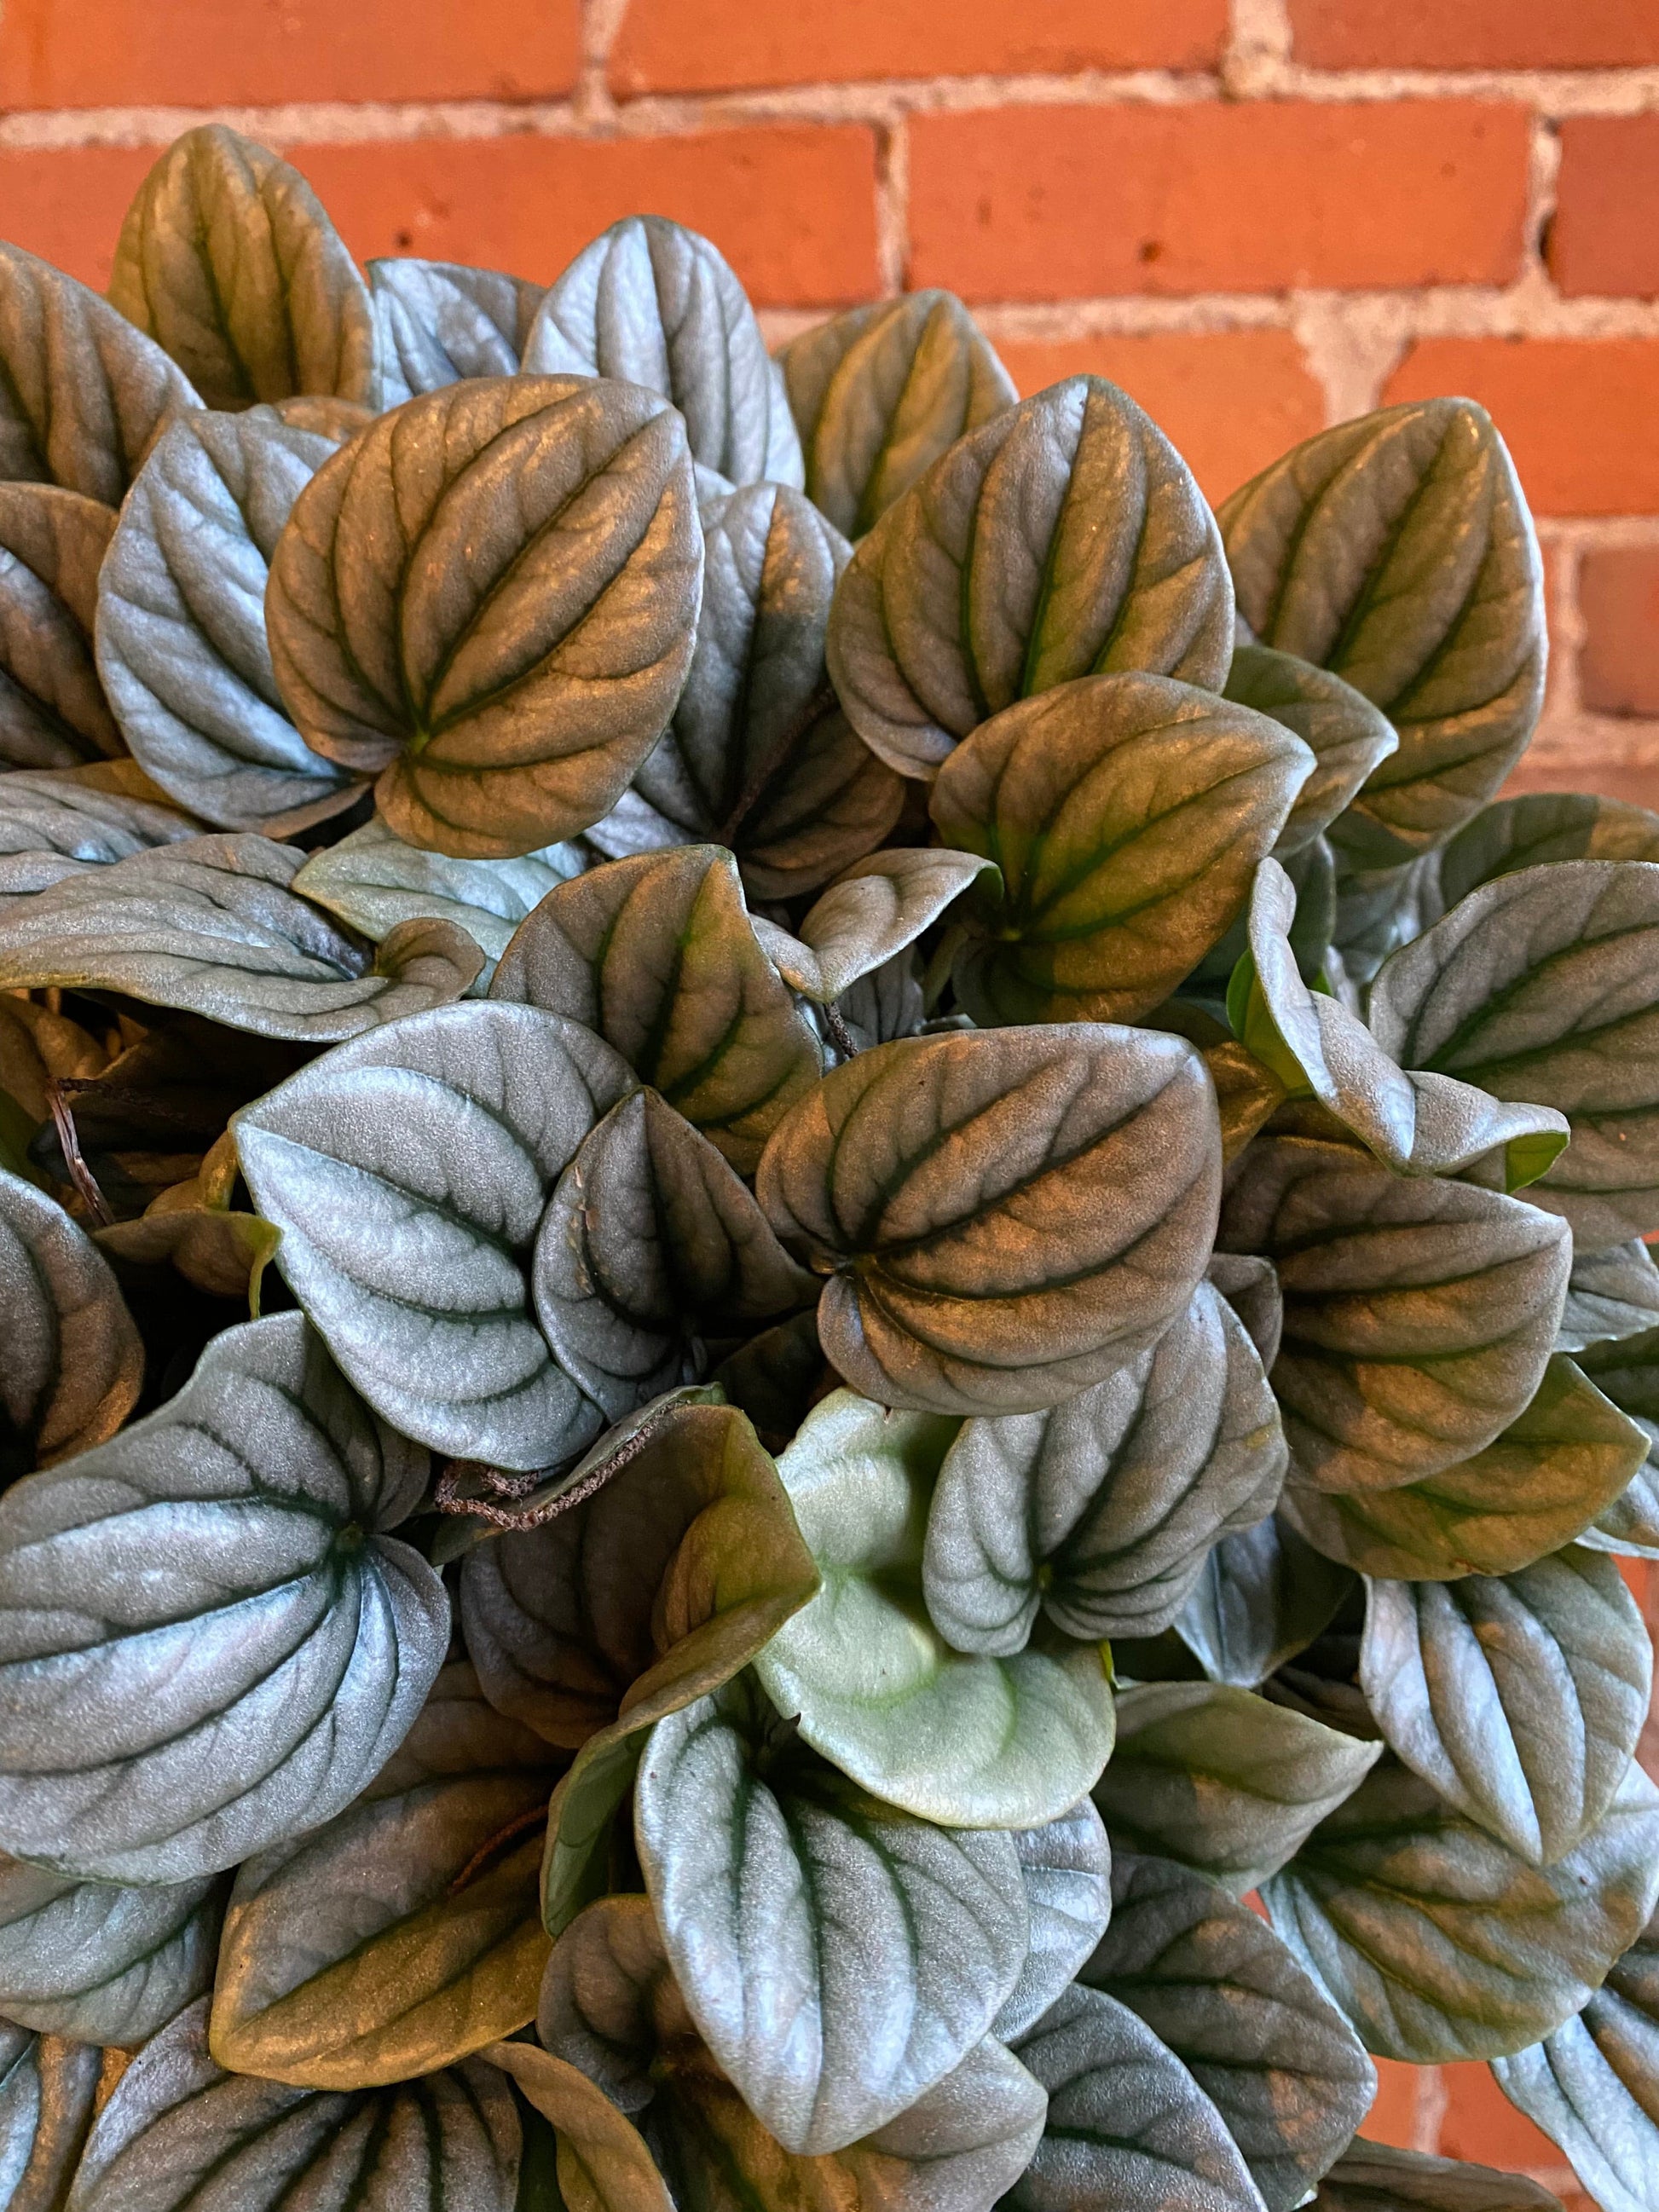 Plant Goals Plant Shop 6" Peperomia Frost